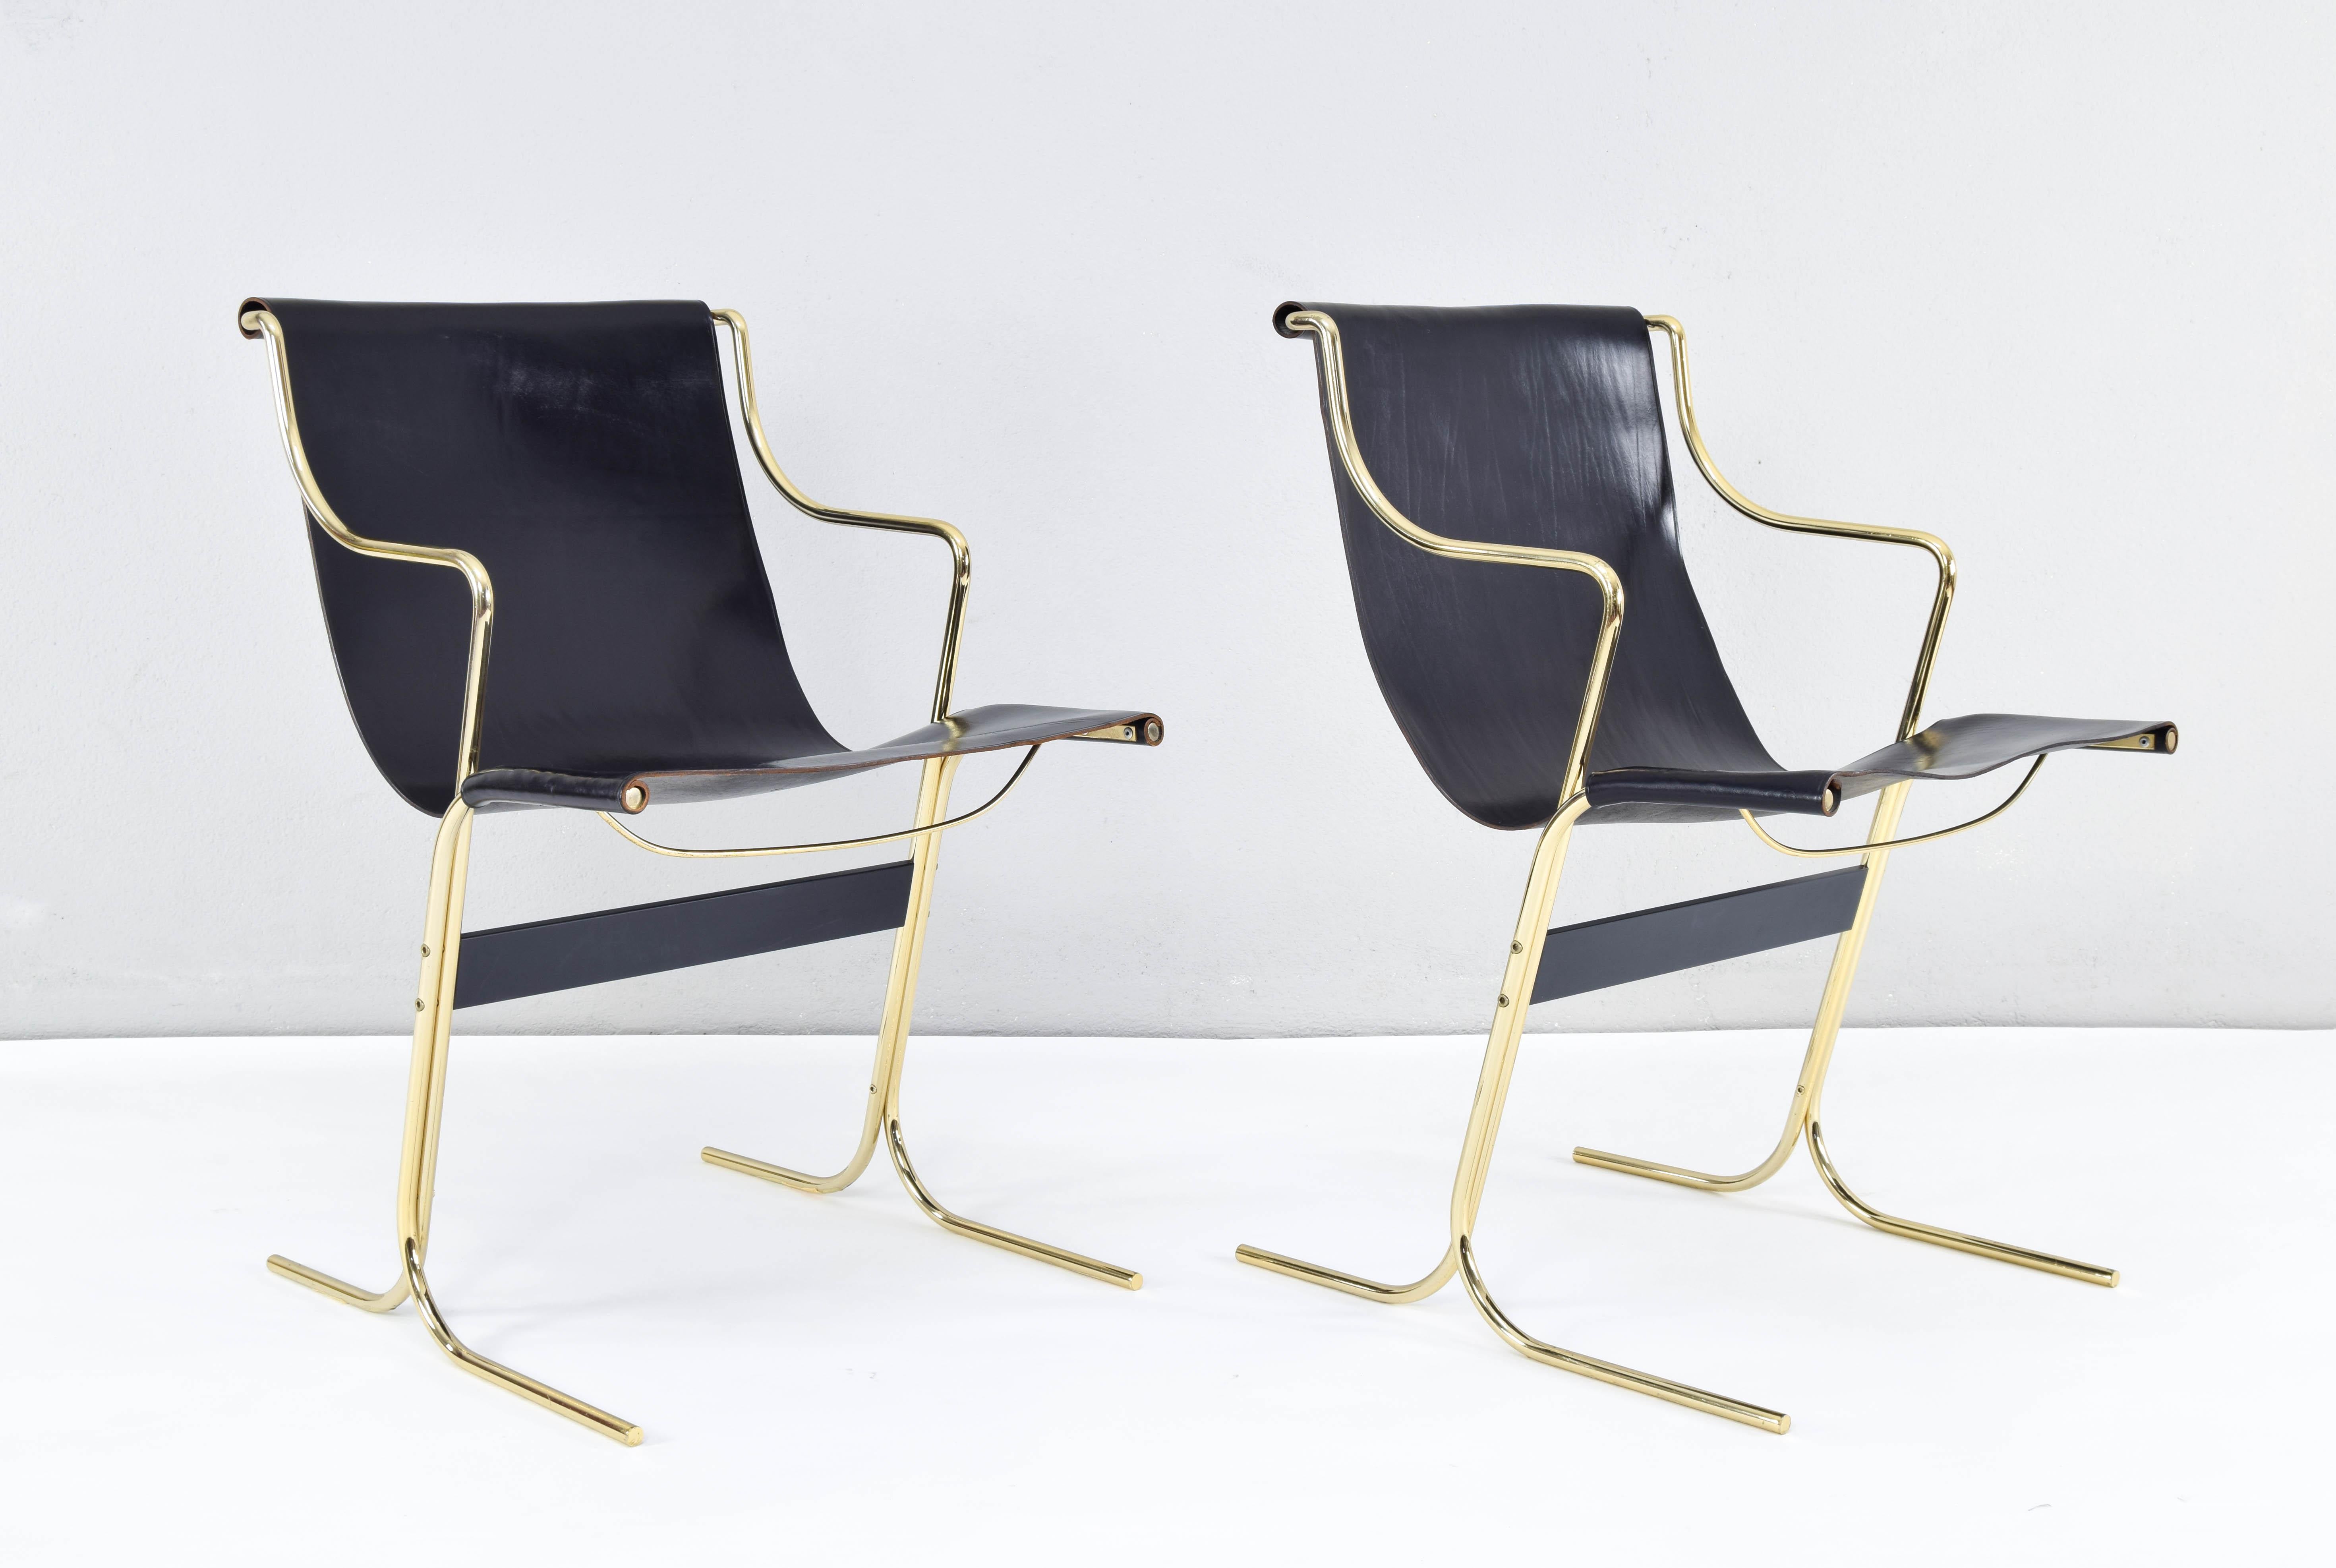 Pair of Italian armchairs Cigno model designed by Ross Littell and Douglas Kelley for ICF of Padova Italia. Outstanding Mid-Century Modern design.
Brass steel frame with anthracite black lacquered central band and one-piece black leather